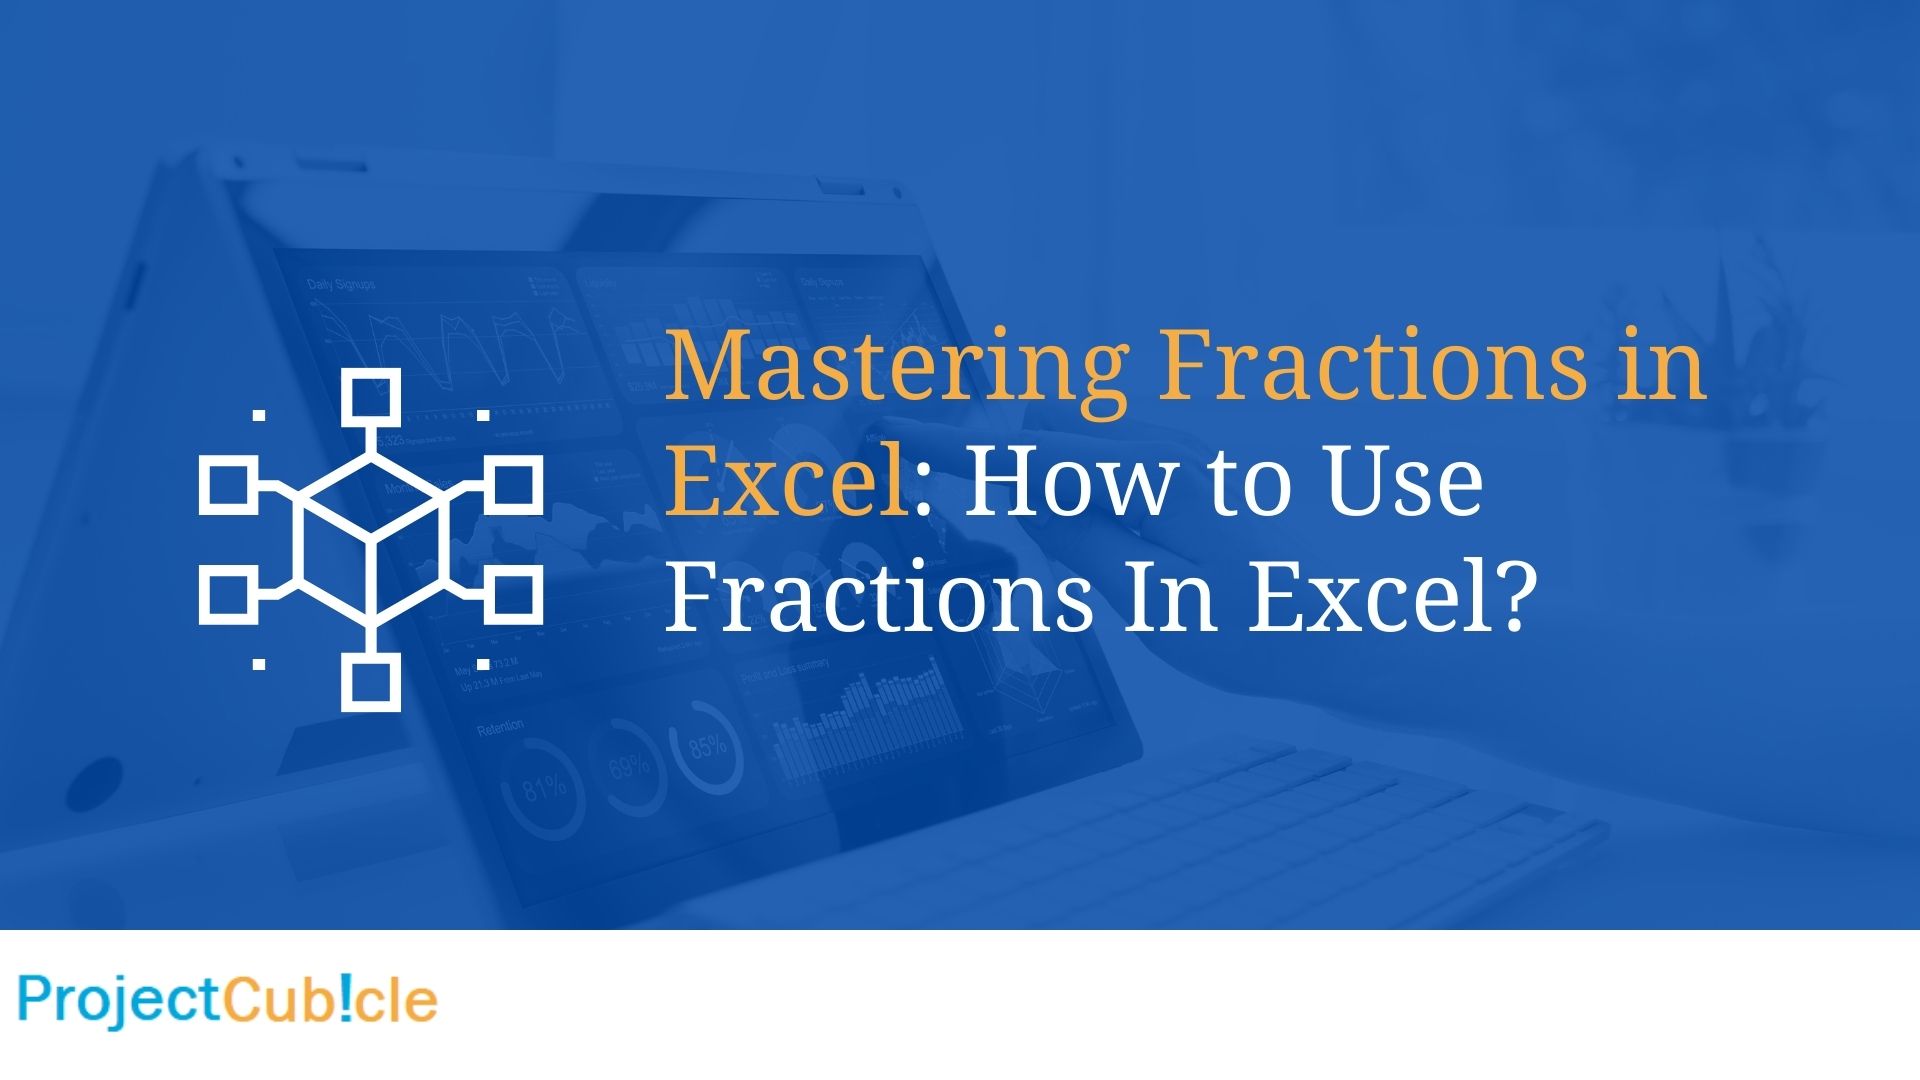 Mastering Fractions in Excel: How to Use Fractions In Excel?